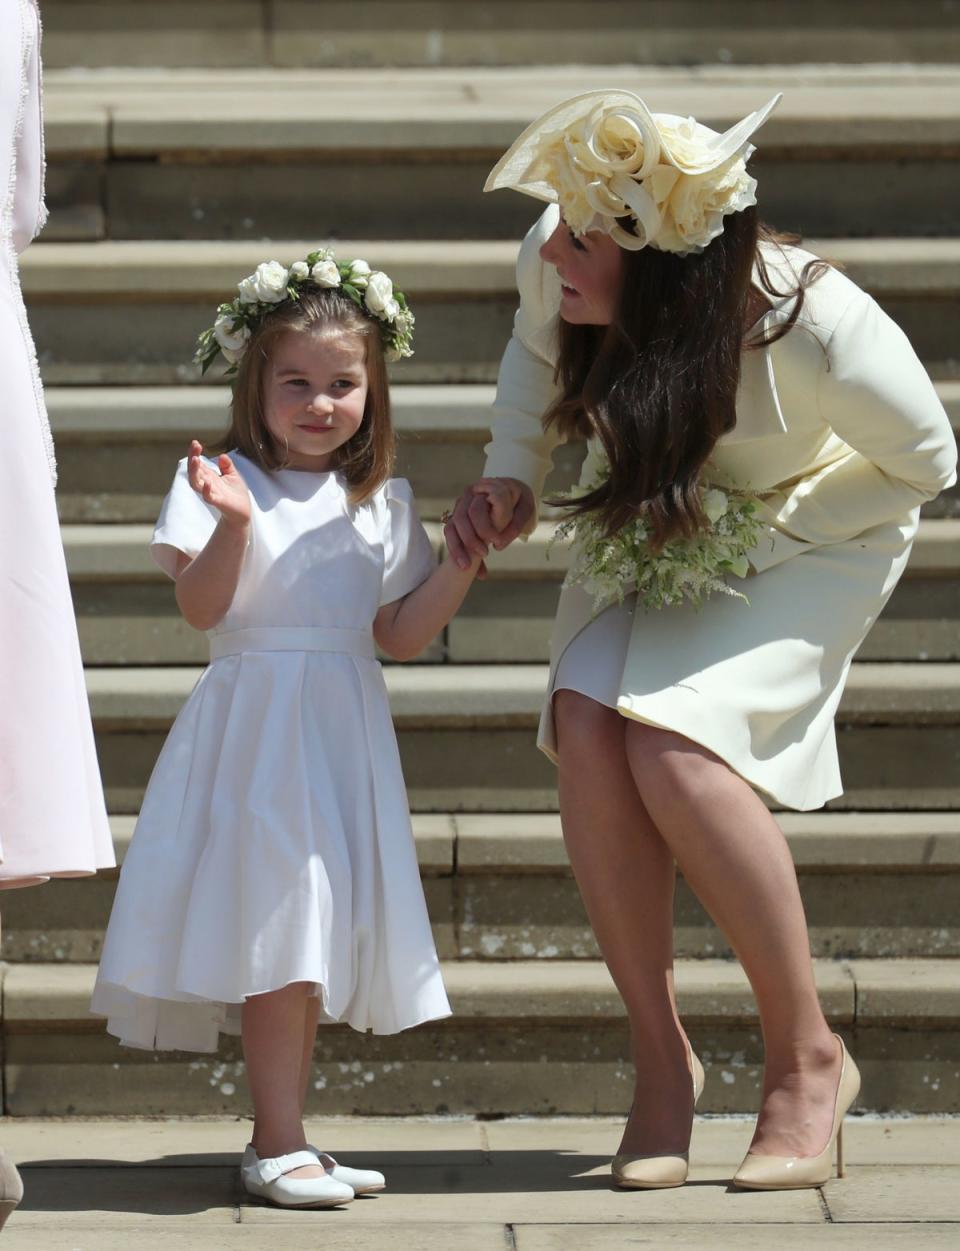 Princess Charlotte and Catherine, Duchess of Cambridge leave St George's Chapel after the wedding (Jane Barlow/WPA Pool/Getty Images)